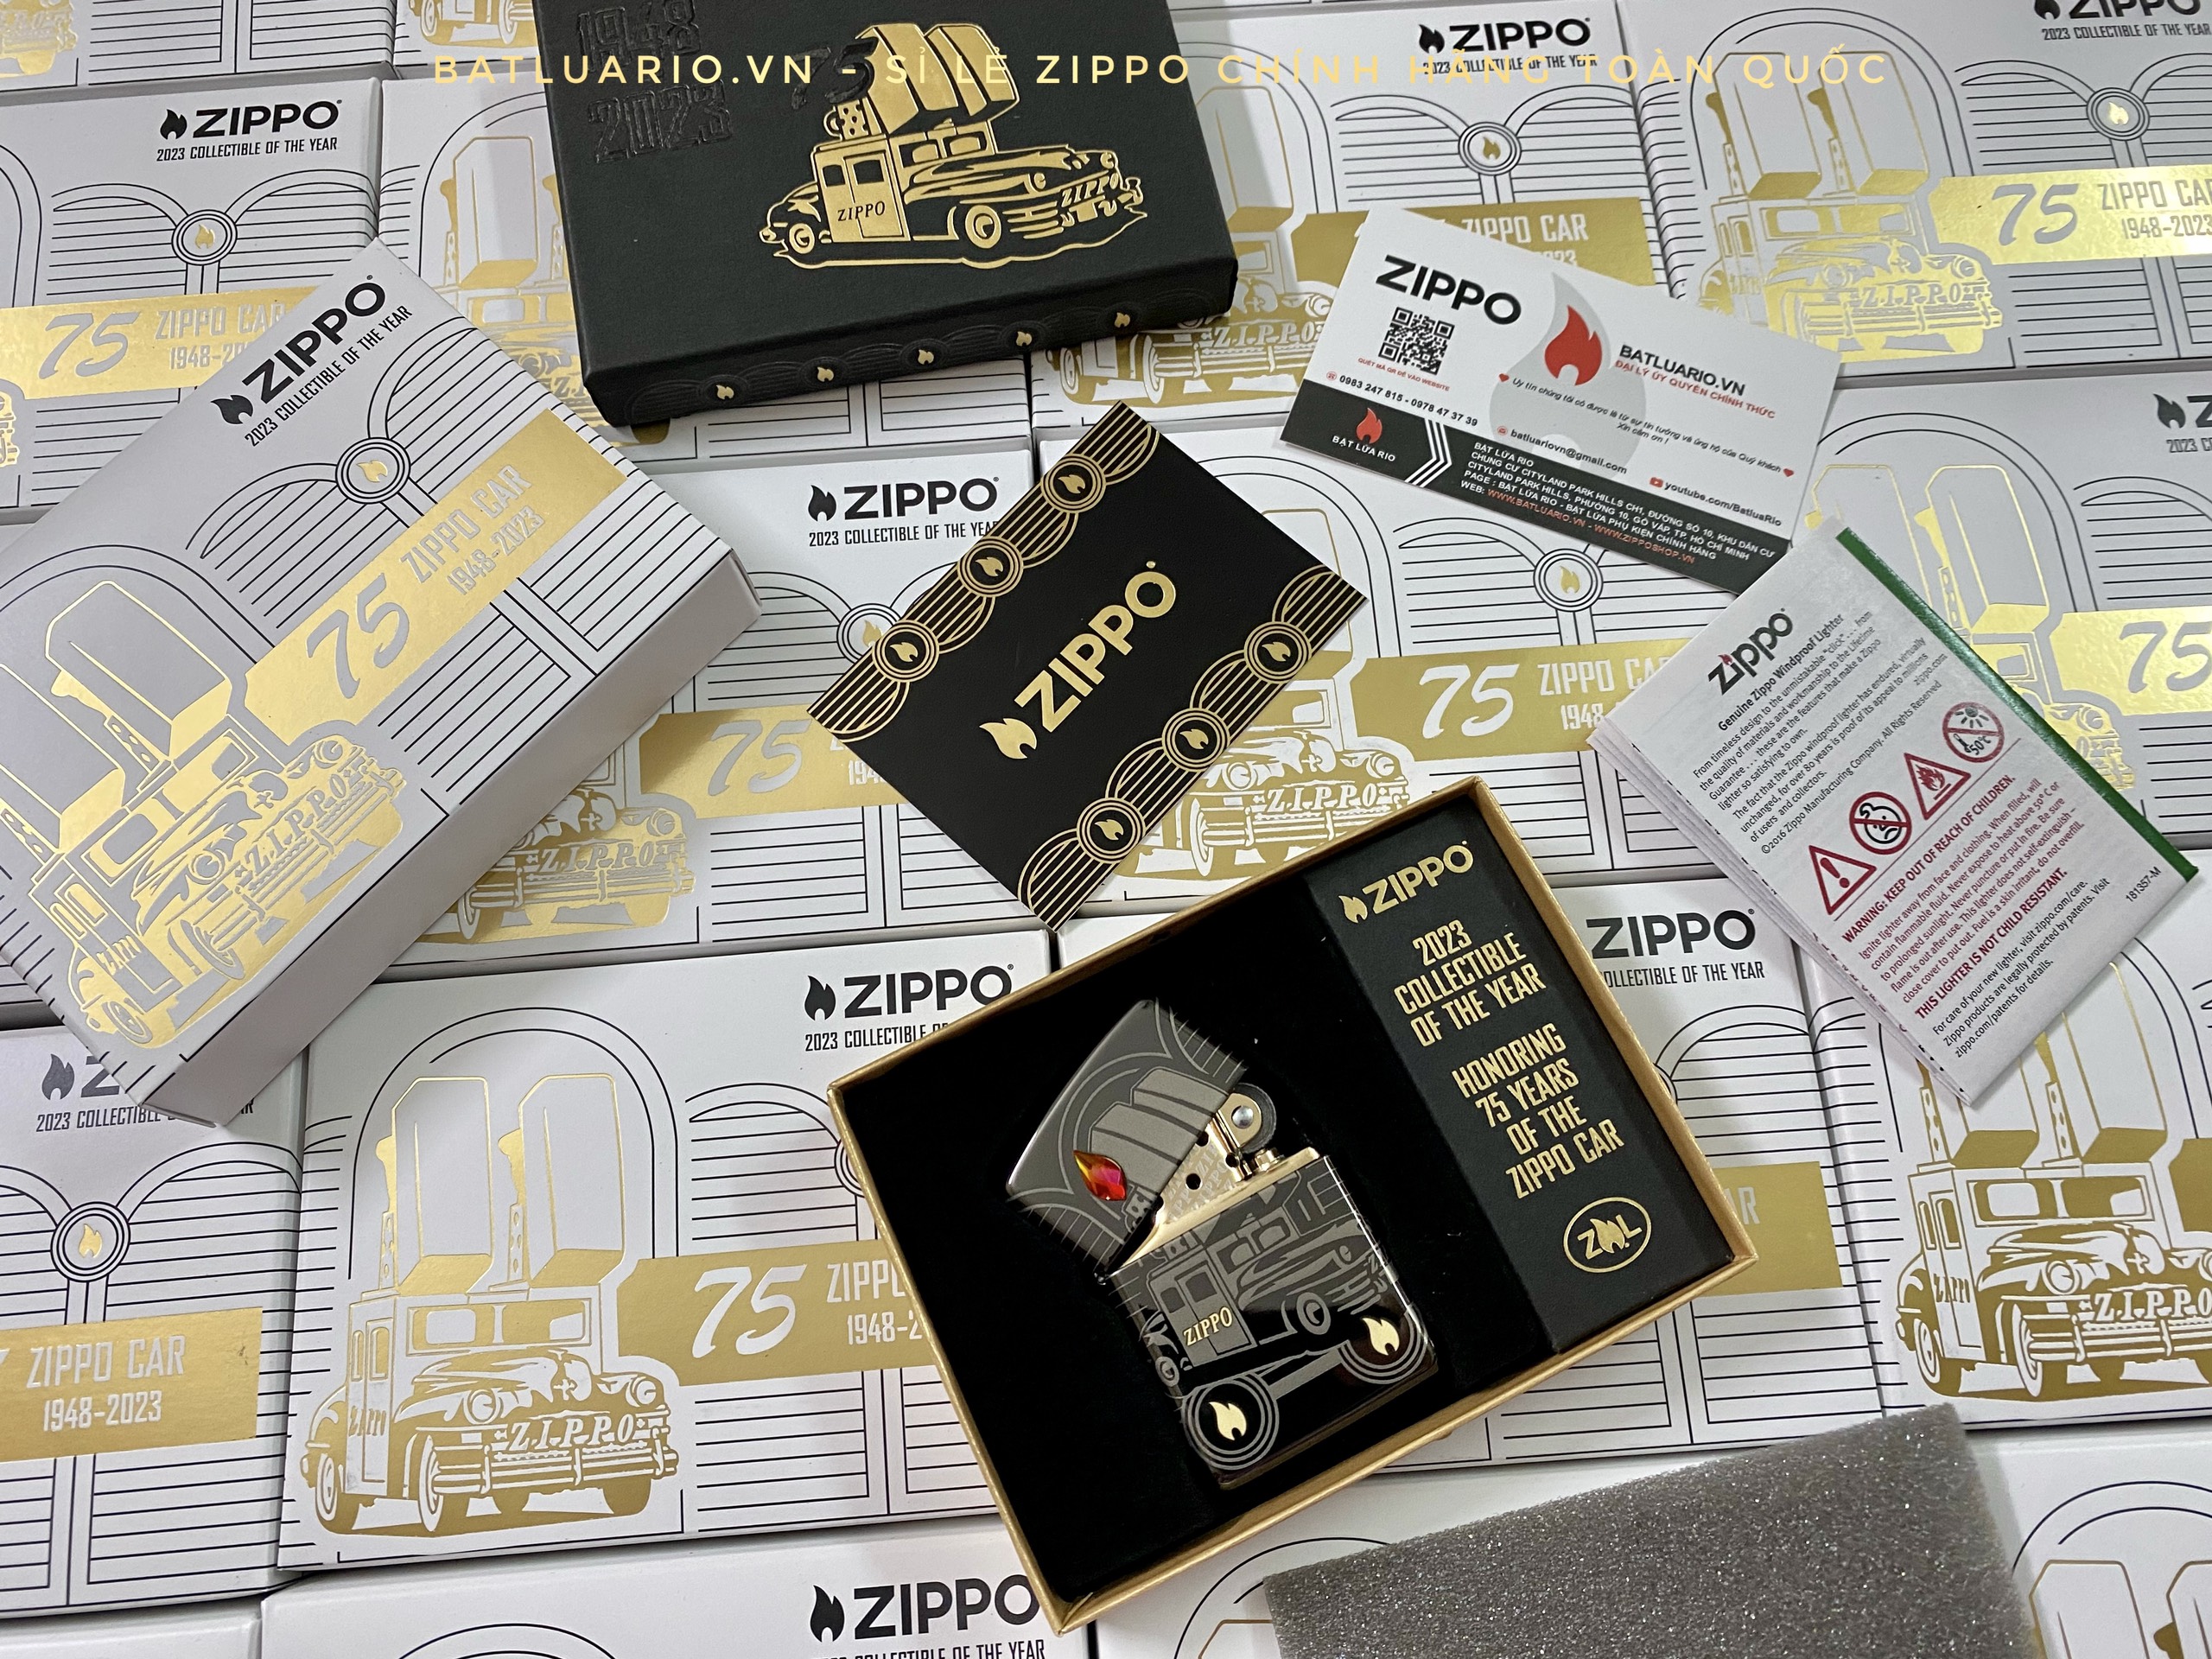 Zippo 48692 - Zippo 2023 Collectible Of The Year - Zippo Car 75th Anniversary Asia Pacific Limited Edition - Zippo COTY 2023 - Honoring 75 Years Of The Zippo Car 14